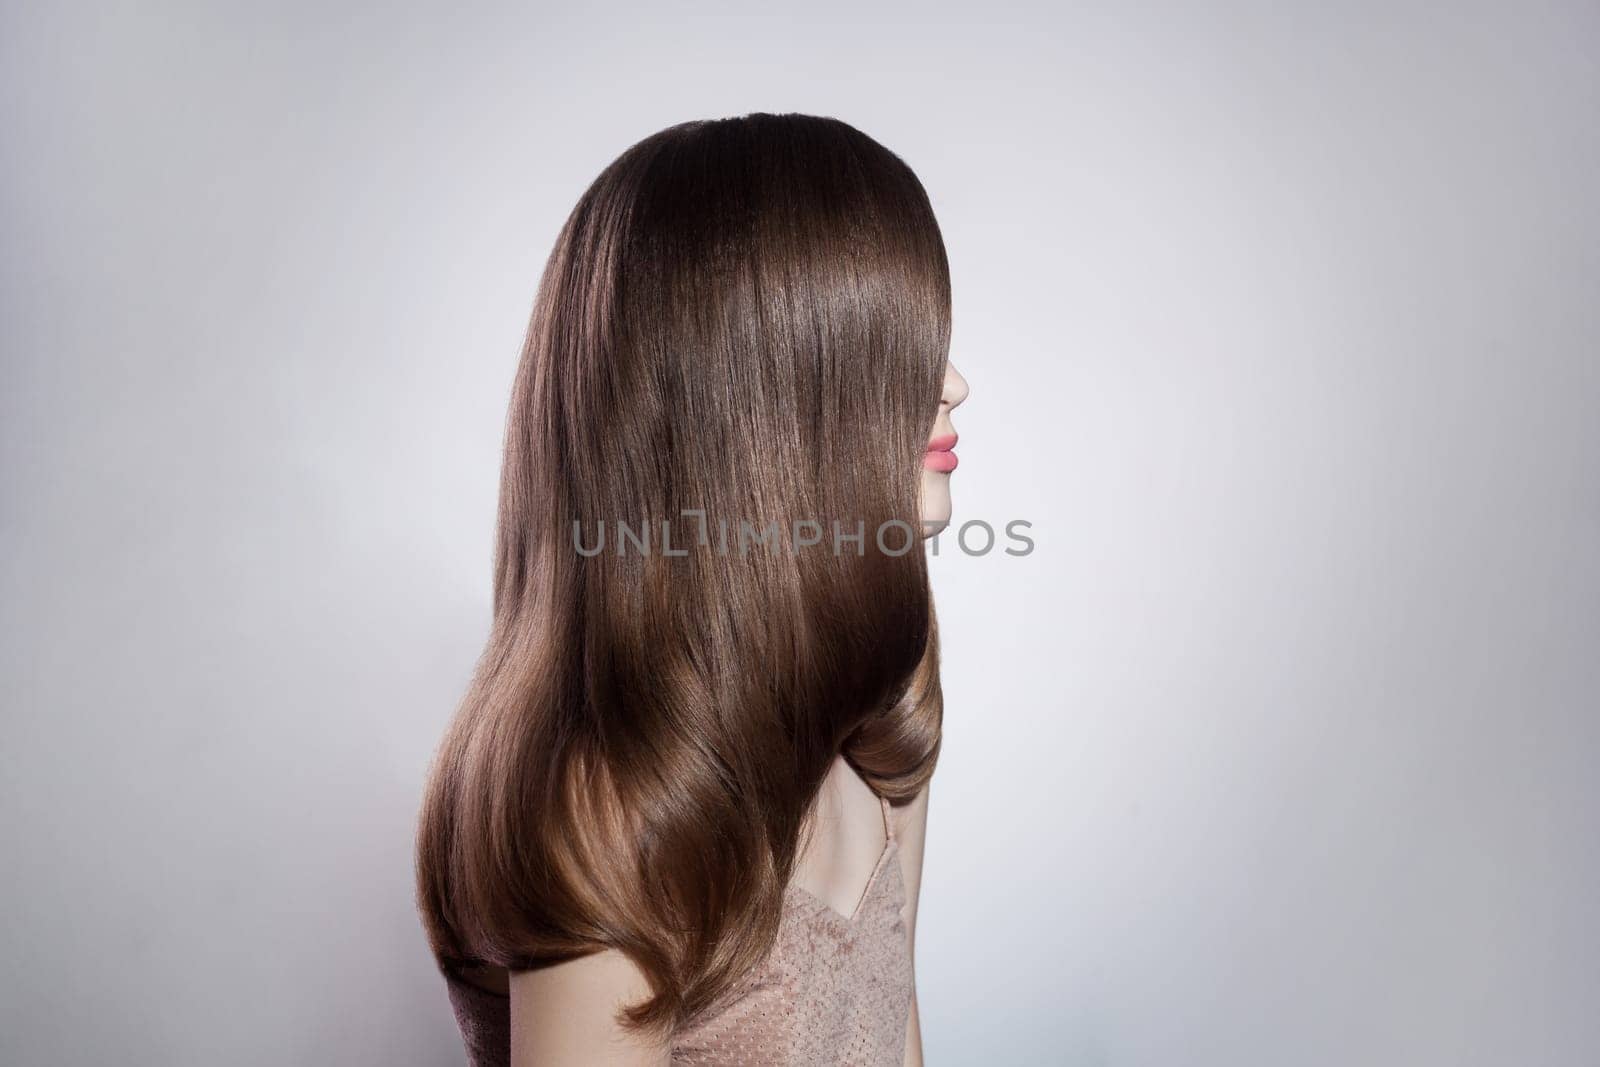 Side view portrait of brunette woman with dark shiny hair and makeup, looking away, showing her hair after keratin and using new shampoo. Indoor studio shot isolated on gray background.